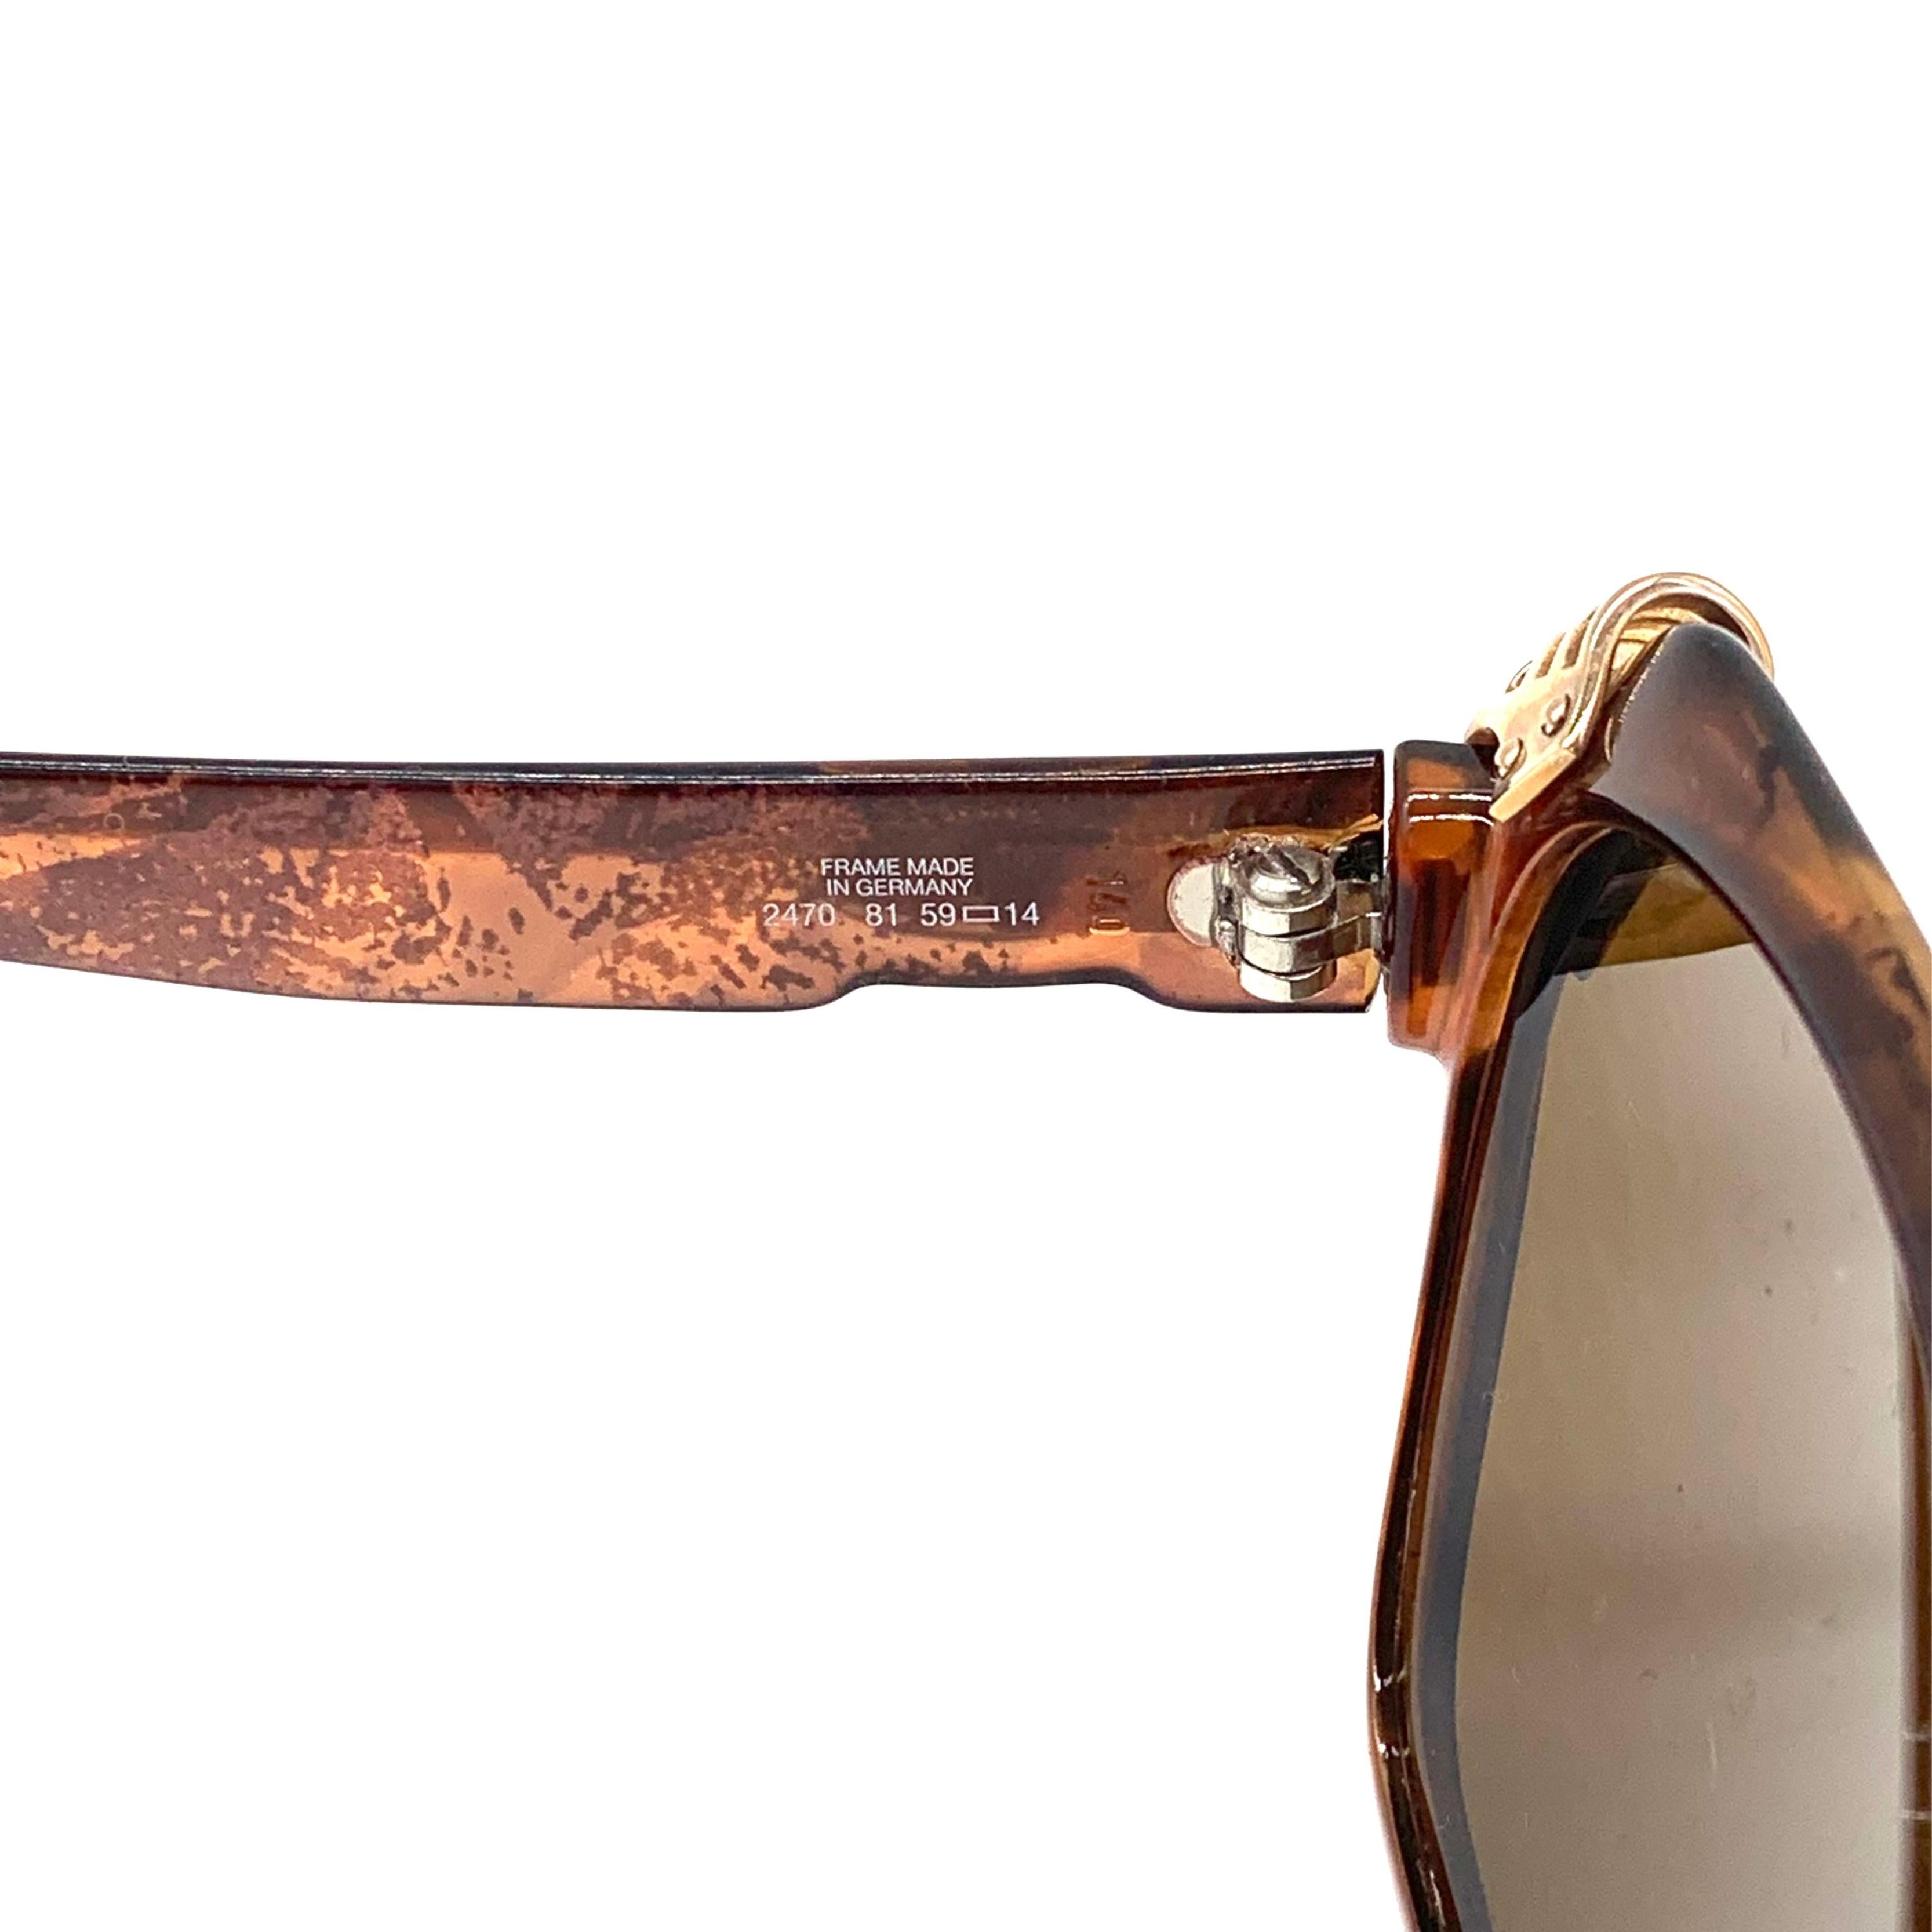 These Christian Dior Optyl Cateye Sunglasses feature a vintage style cateye frame crafted from Optyl, an ultra-lightweight and durable material. The frames are adorned with rhinestone stud detailing on the corners and fit with brown UV lenses for